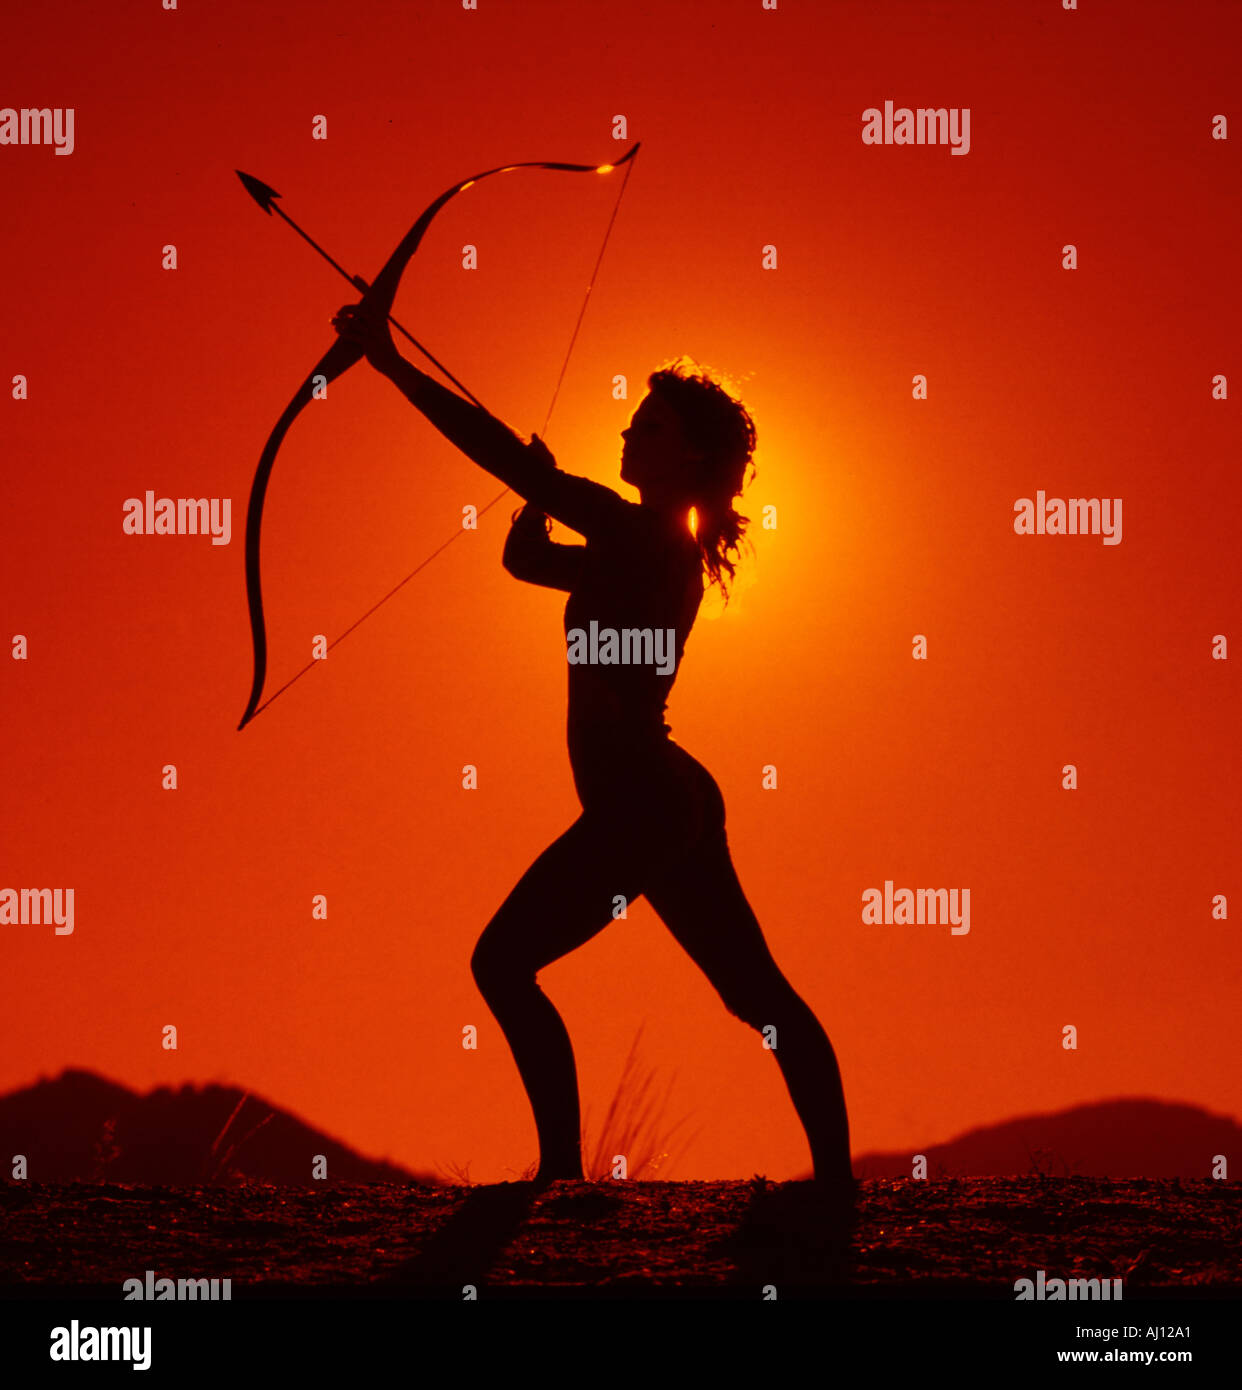 Sunset silhouette of dramatic and agressive pose of young woman aiming a bow and arrow Stock Photo